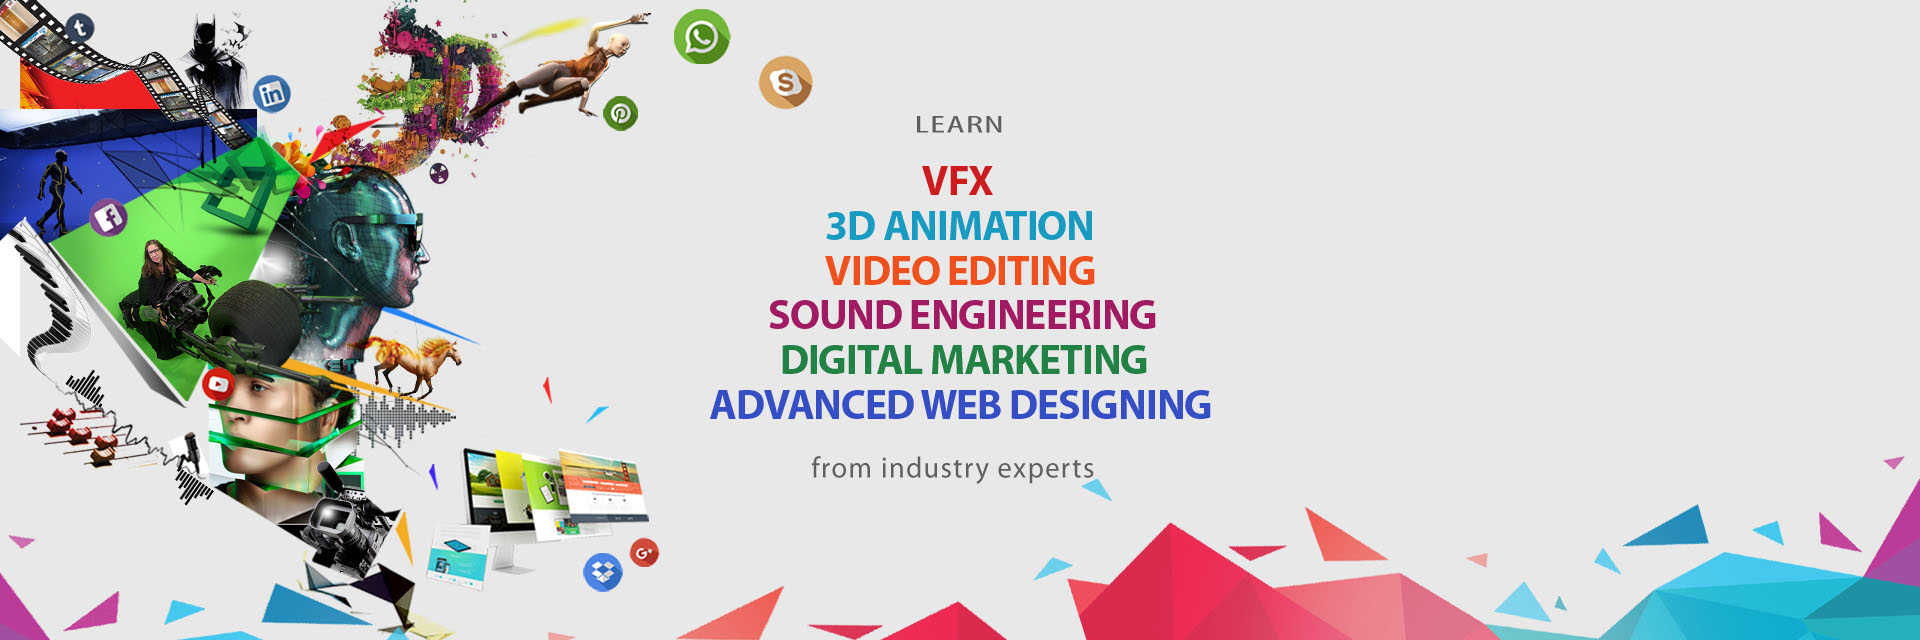 Learn VFX, 3d animation, Digital marketing, Video Editing, Sound Editing and Advance Web Designing courses in kolkata